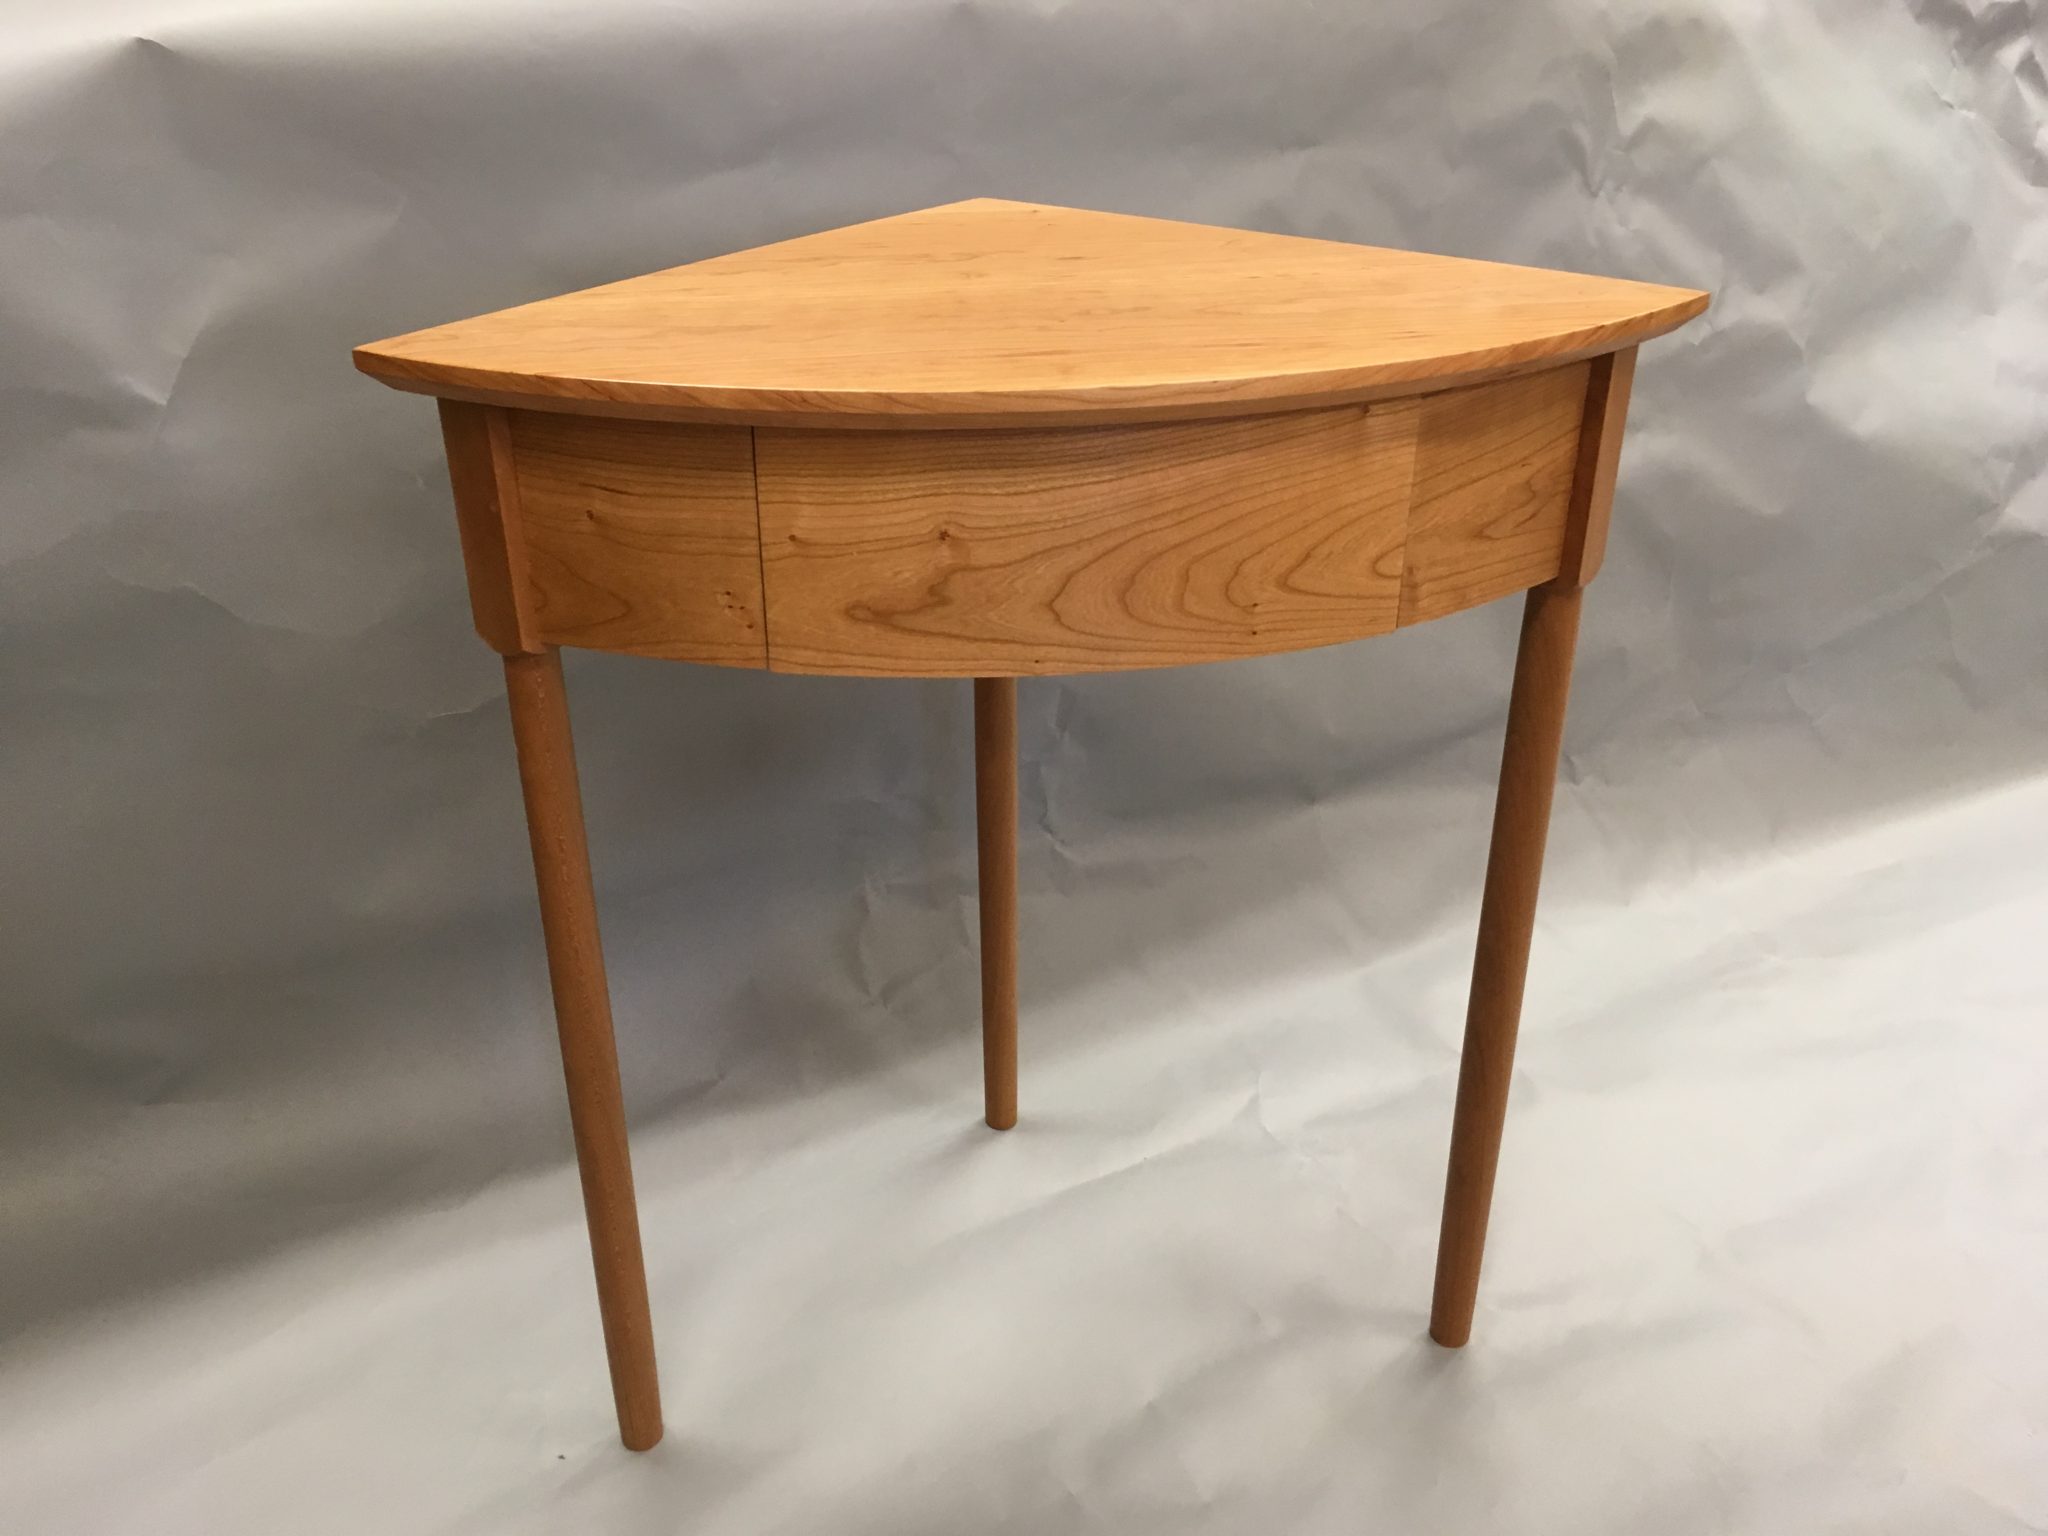 3 leg corner table in cherry with drawer